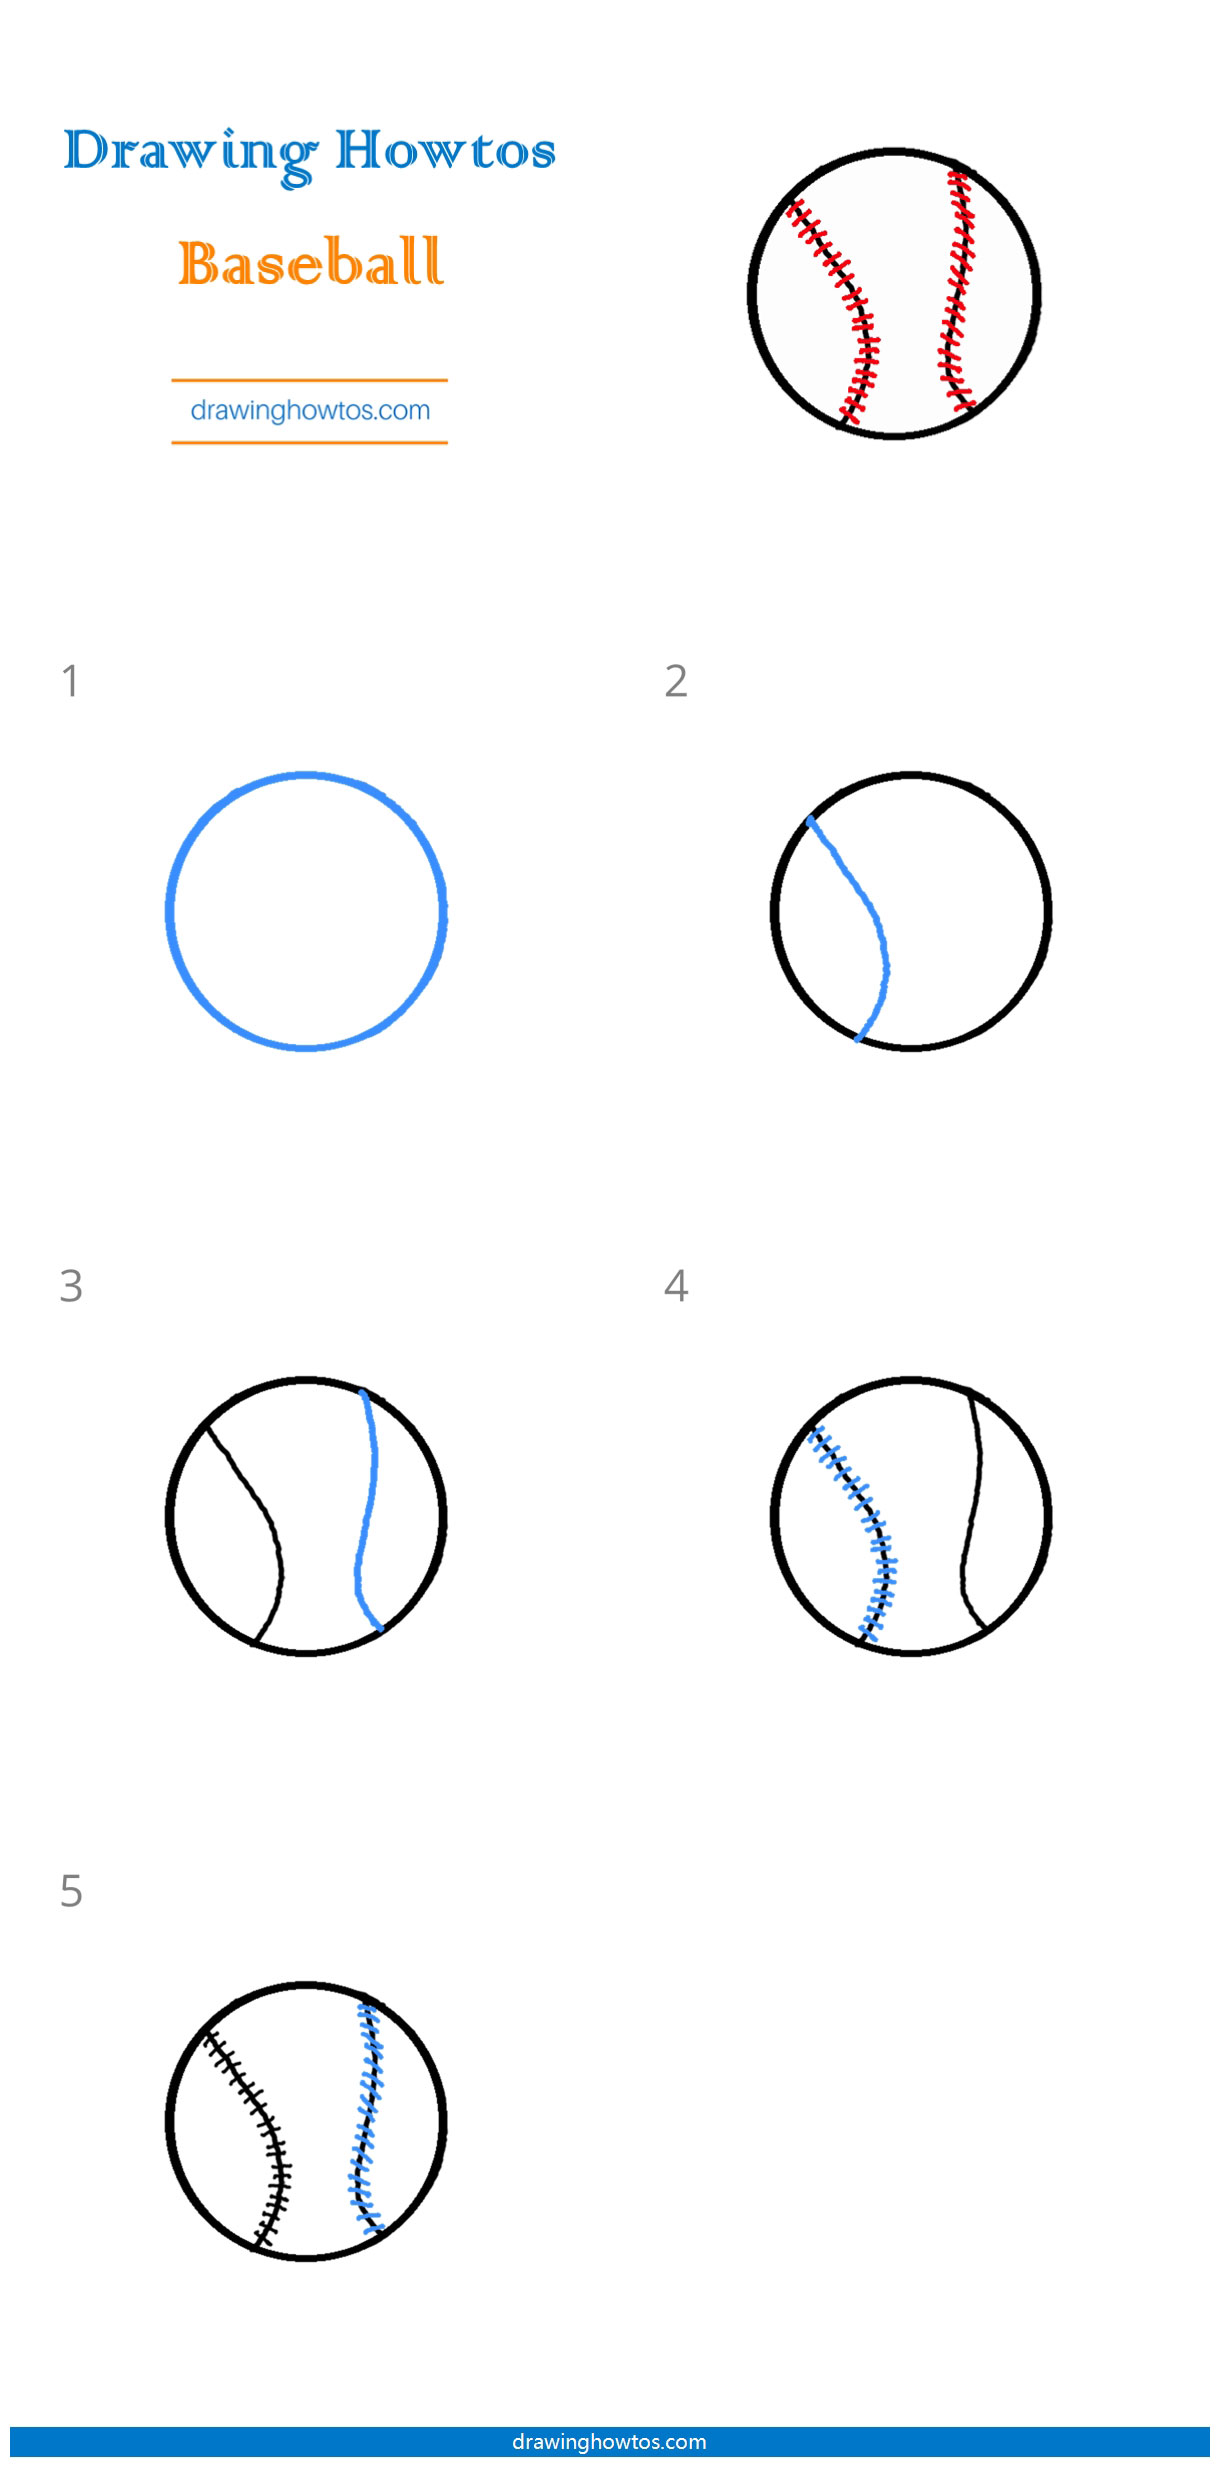 How to Draw a Baseball Step by Step Easy Drawing Guides Drawing Howtos